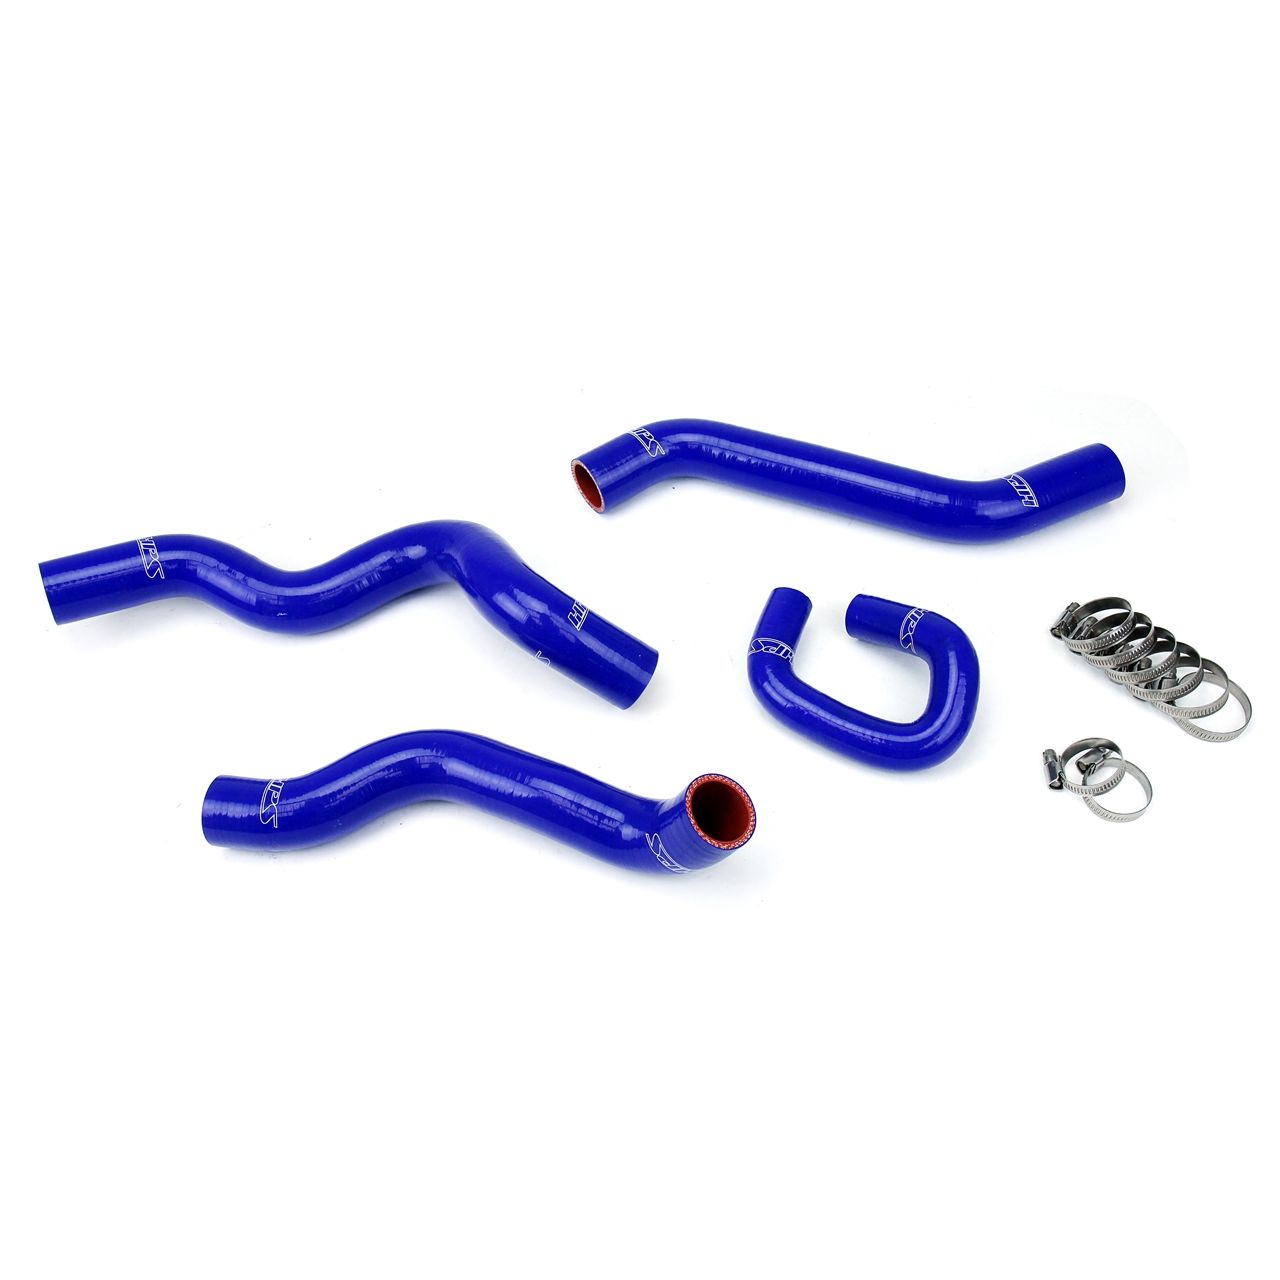 HPS Blue Reinforced Silicone Radiator Hose Kit Coolant for Chevy 08-10 Cobalt SS 2.0L Turbo